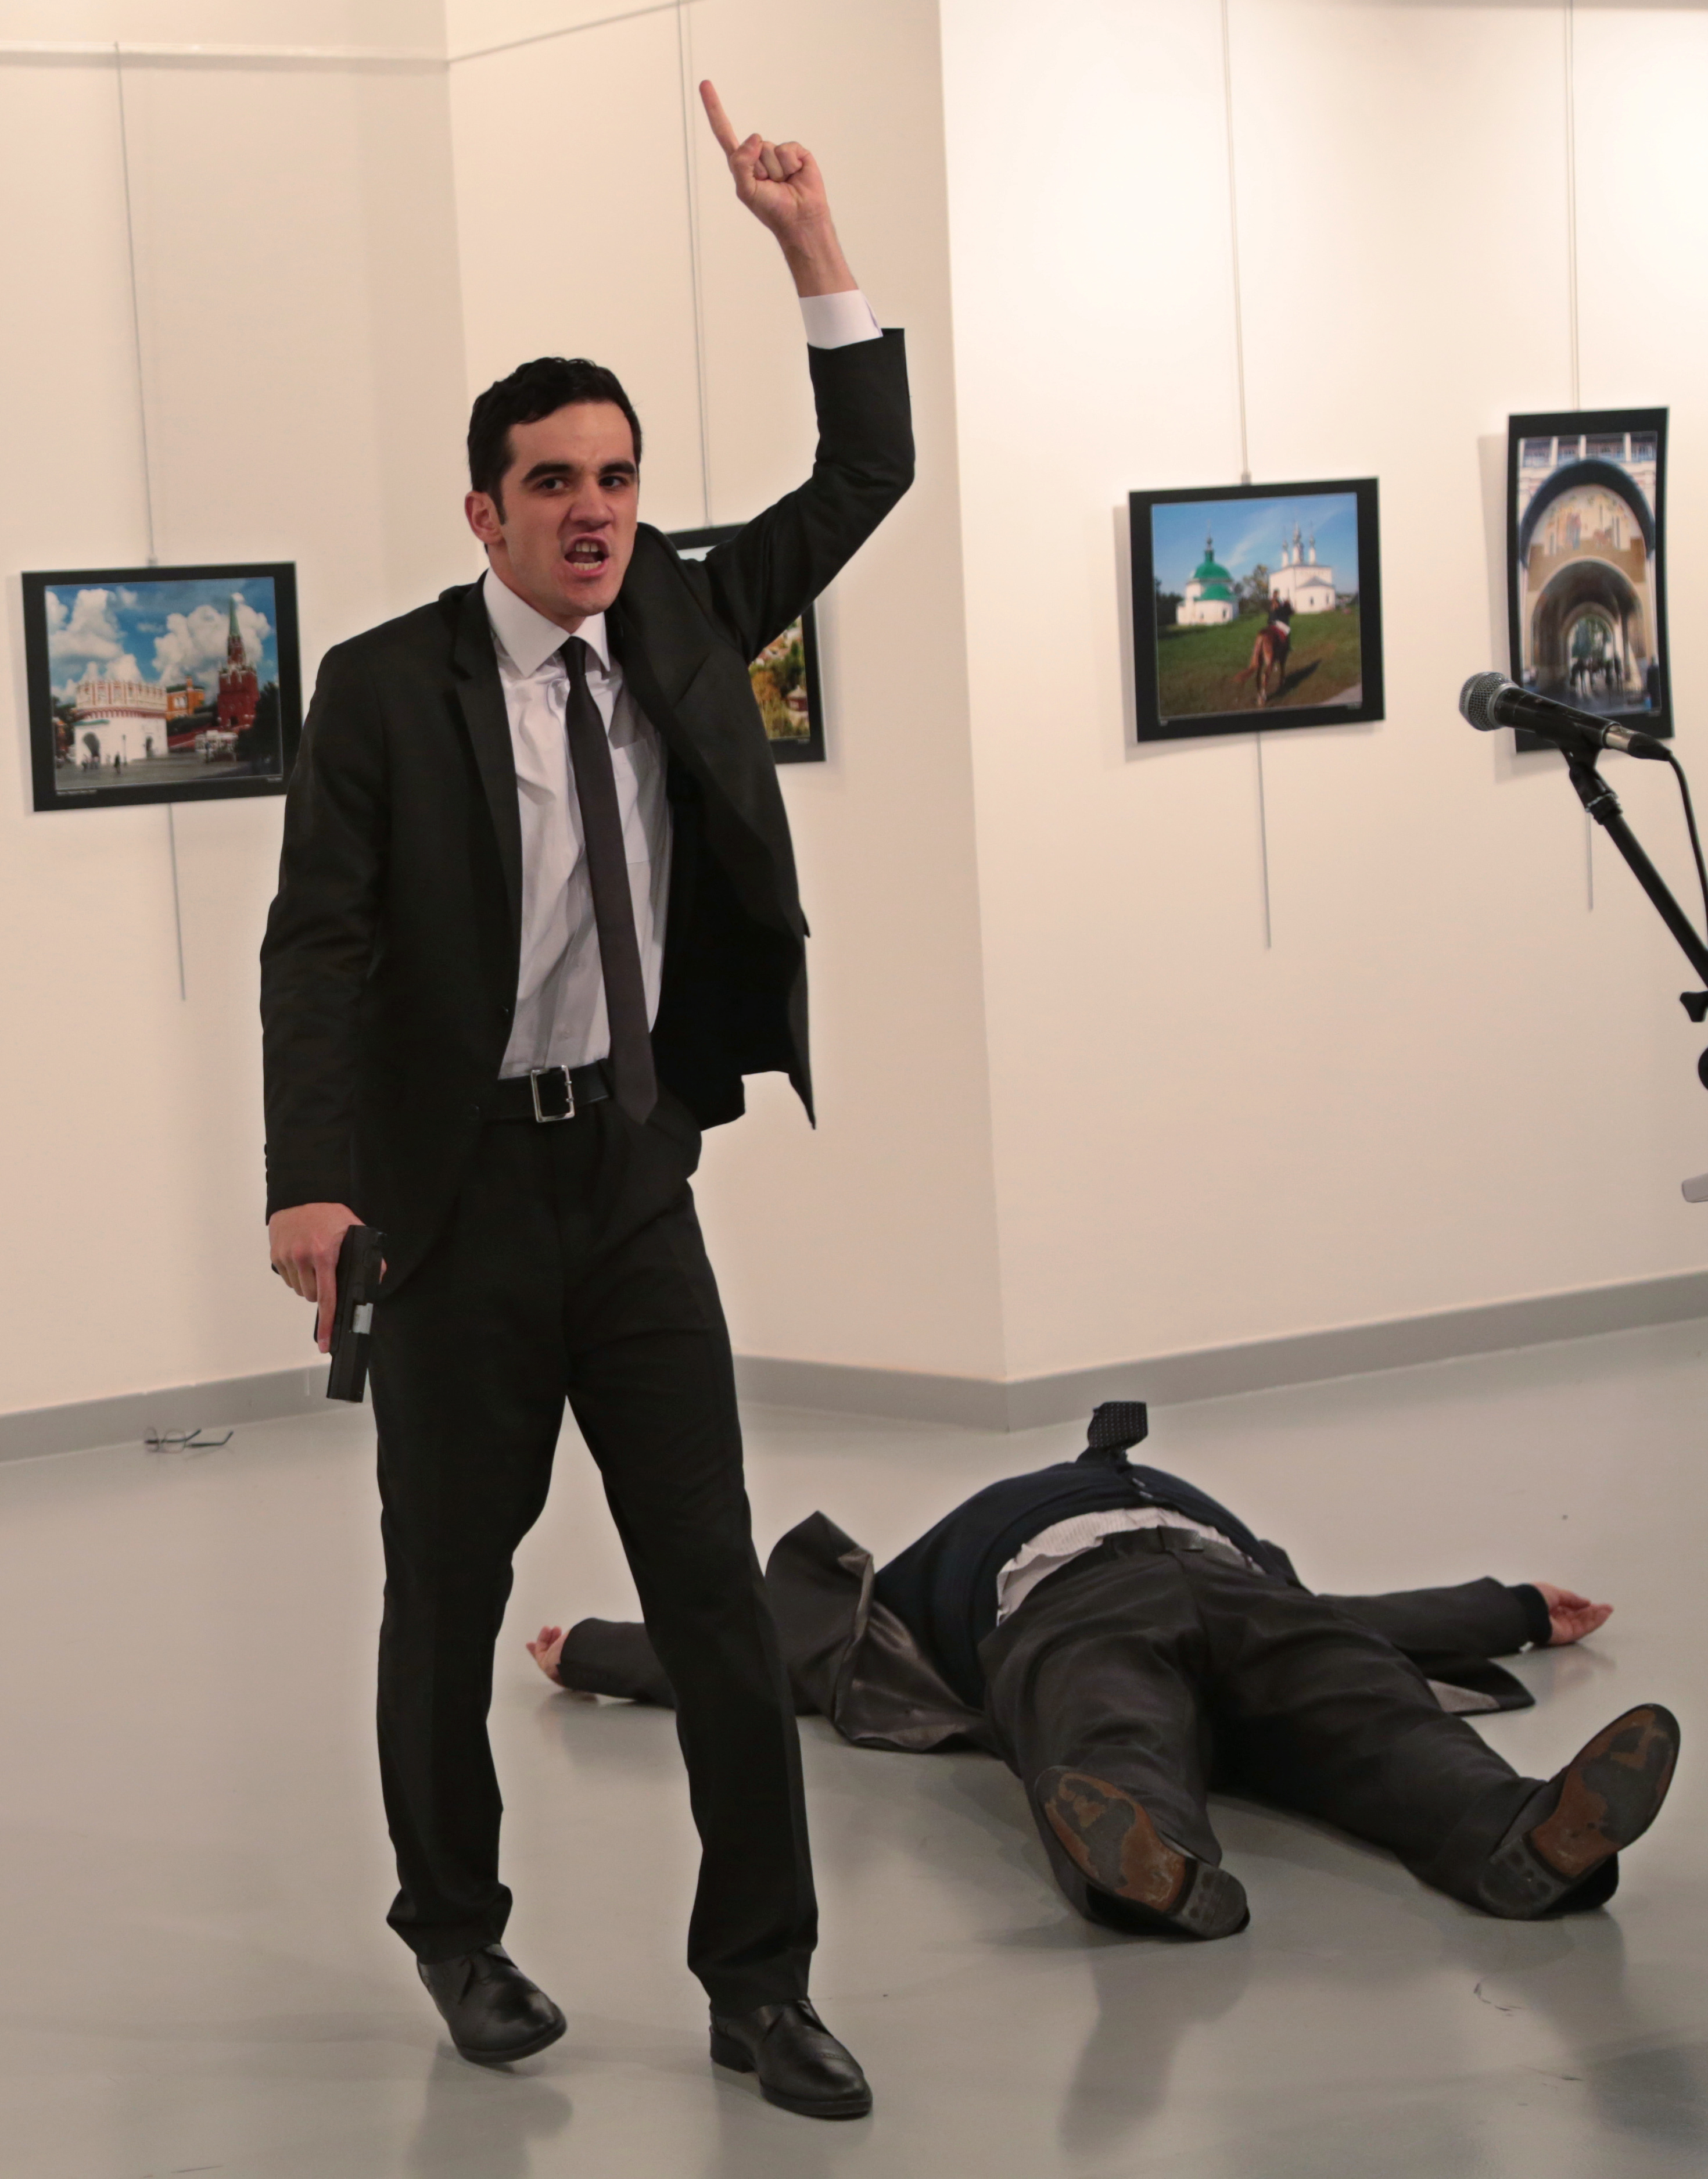 A man gestures after shooting Andrei Karlov, the Russian Ambassador to Turkey, on the floor, at a photo gallery in Ankara, Turkey, Monday, Dec. 19, 2016. The ambassador's condition wasn't immediately known. (AP Photo/Burhan Ozbilici)